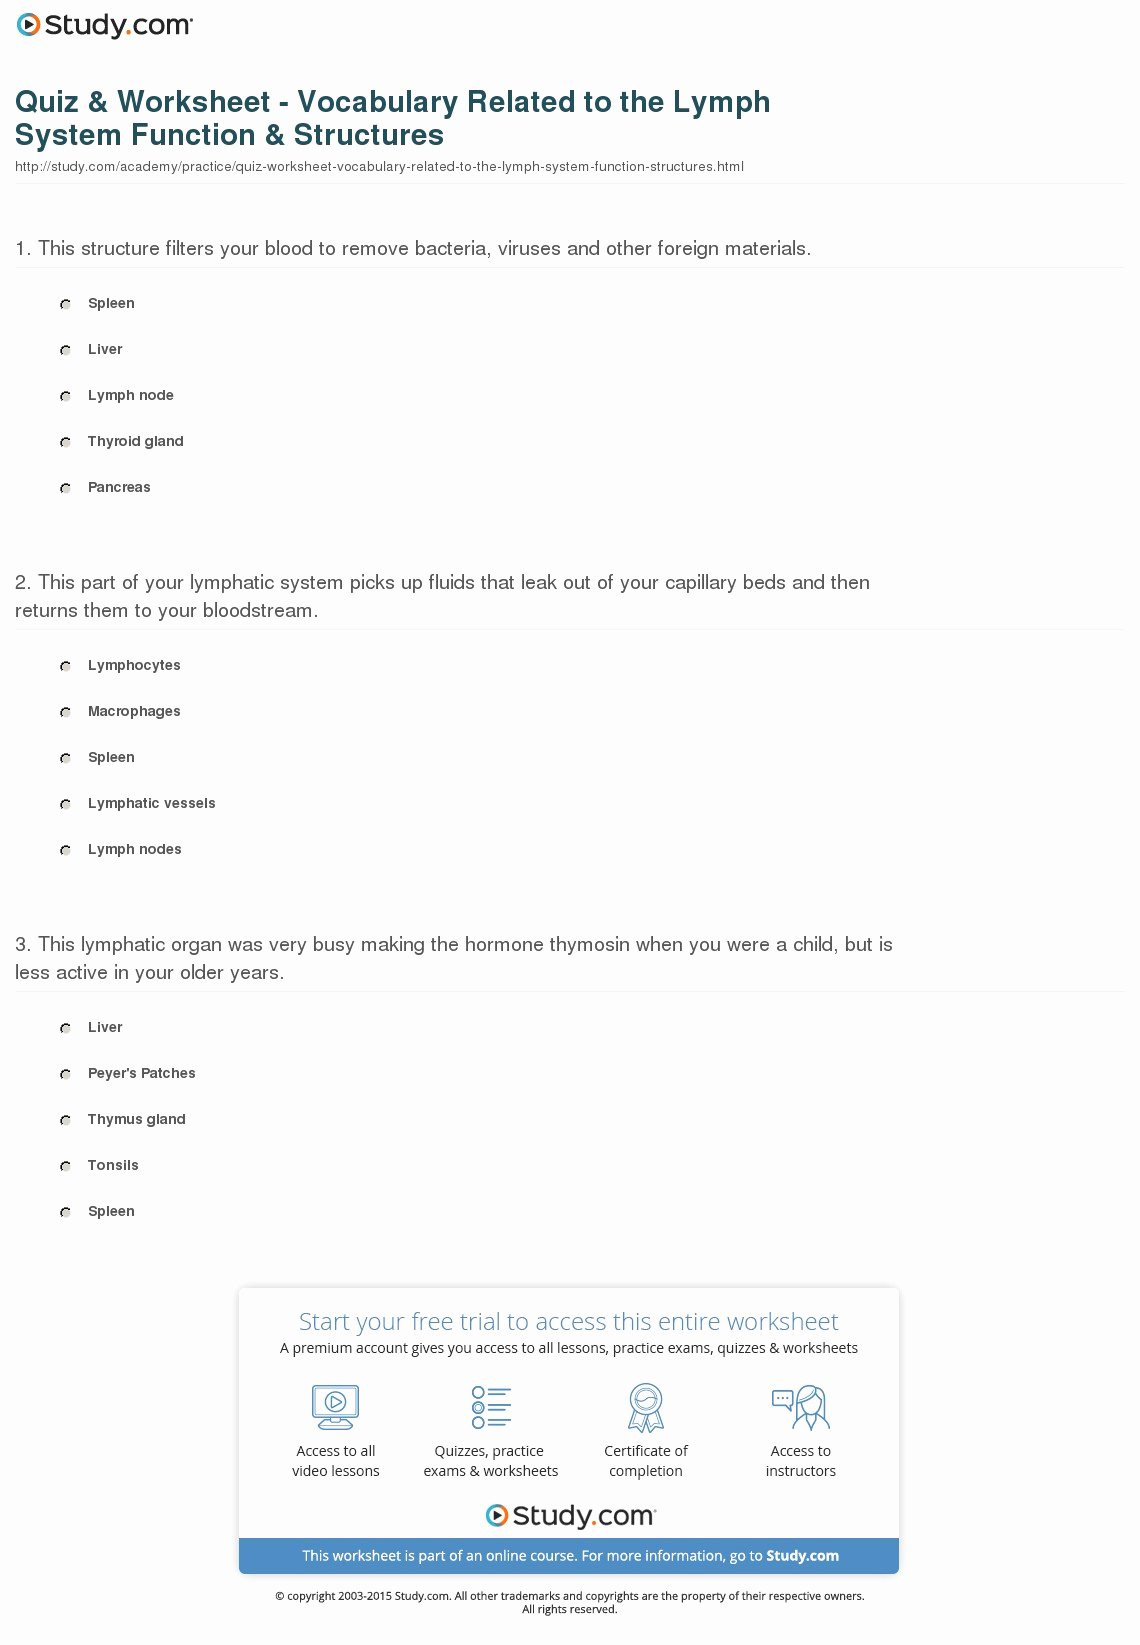 Angle Bisector theorem Worksheet Elegant Quiz &amp; Worksheet Vocabulary Related to the Lymph System